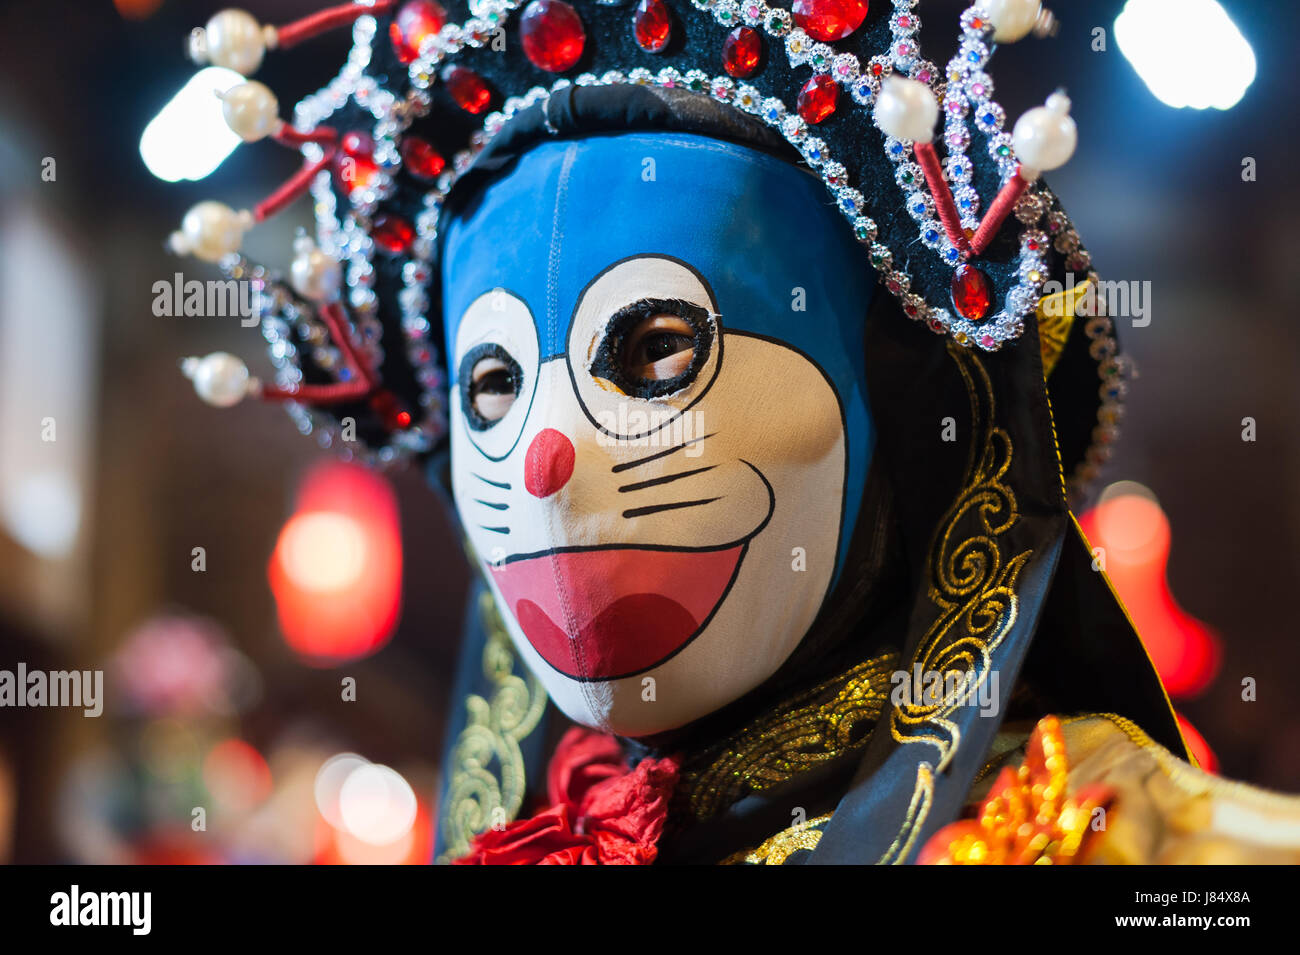 Chengdu, Sichuan Province, China - December 29, 2014: Chinese artist performs traditional face-changing art or bianlian onstage at Chunxifang Chunxilu Stock Photo